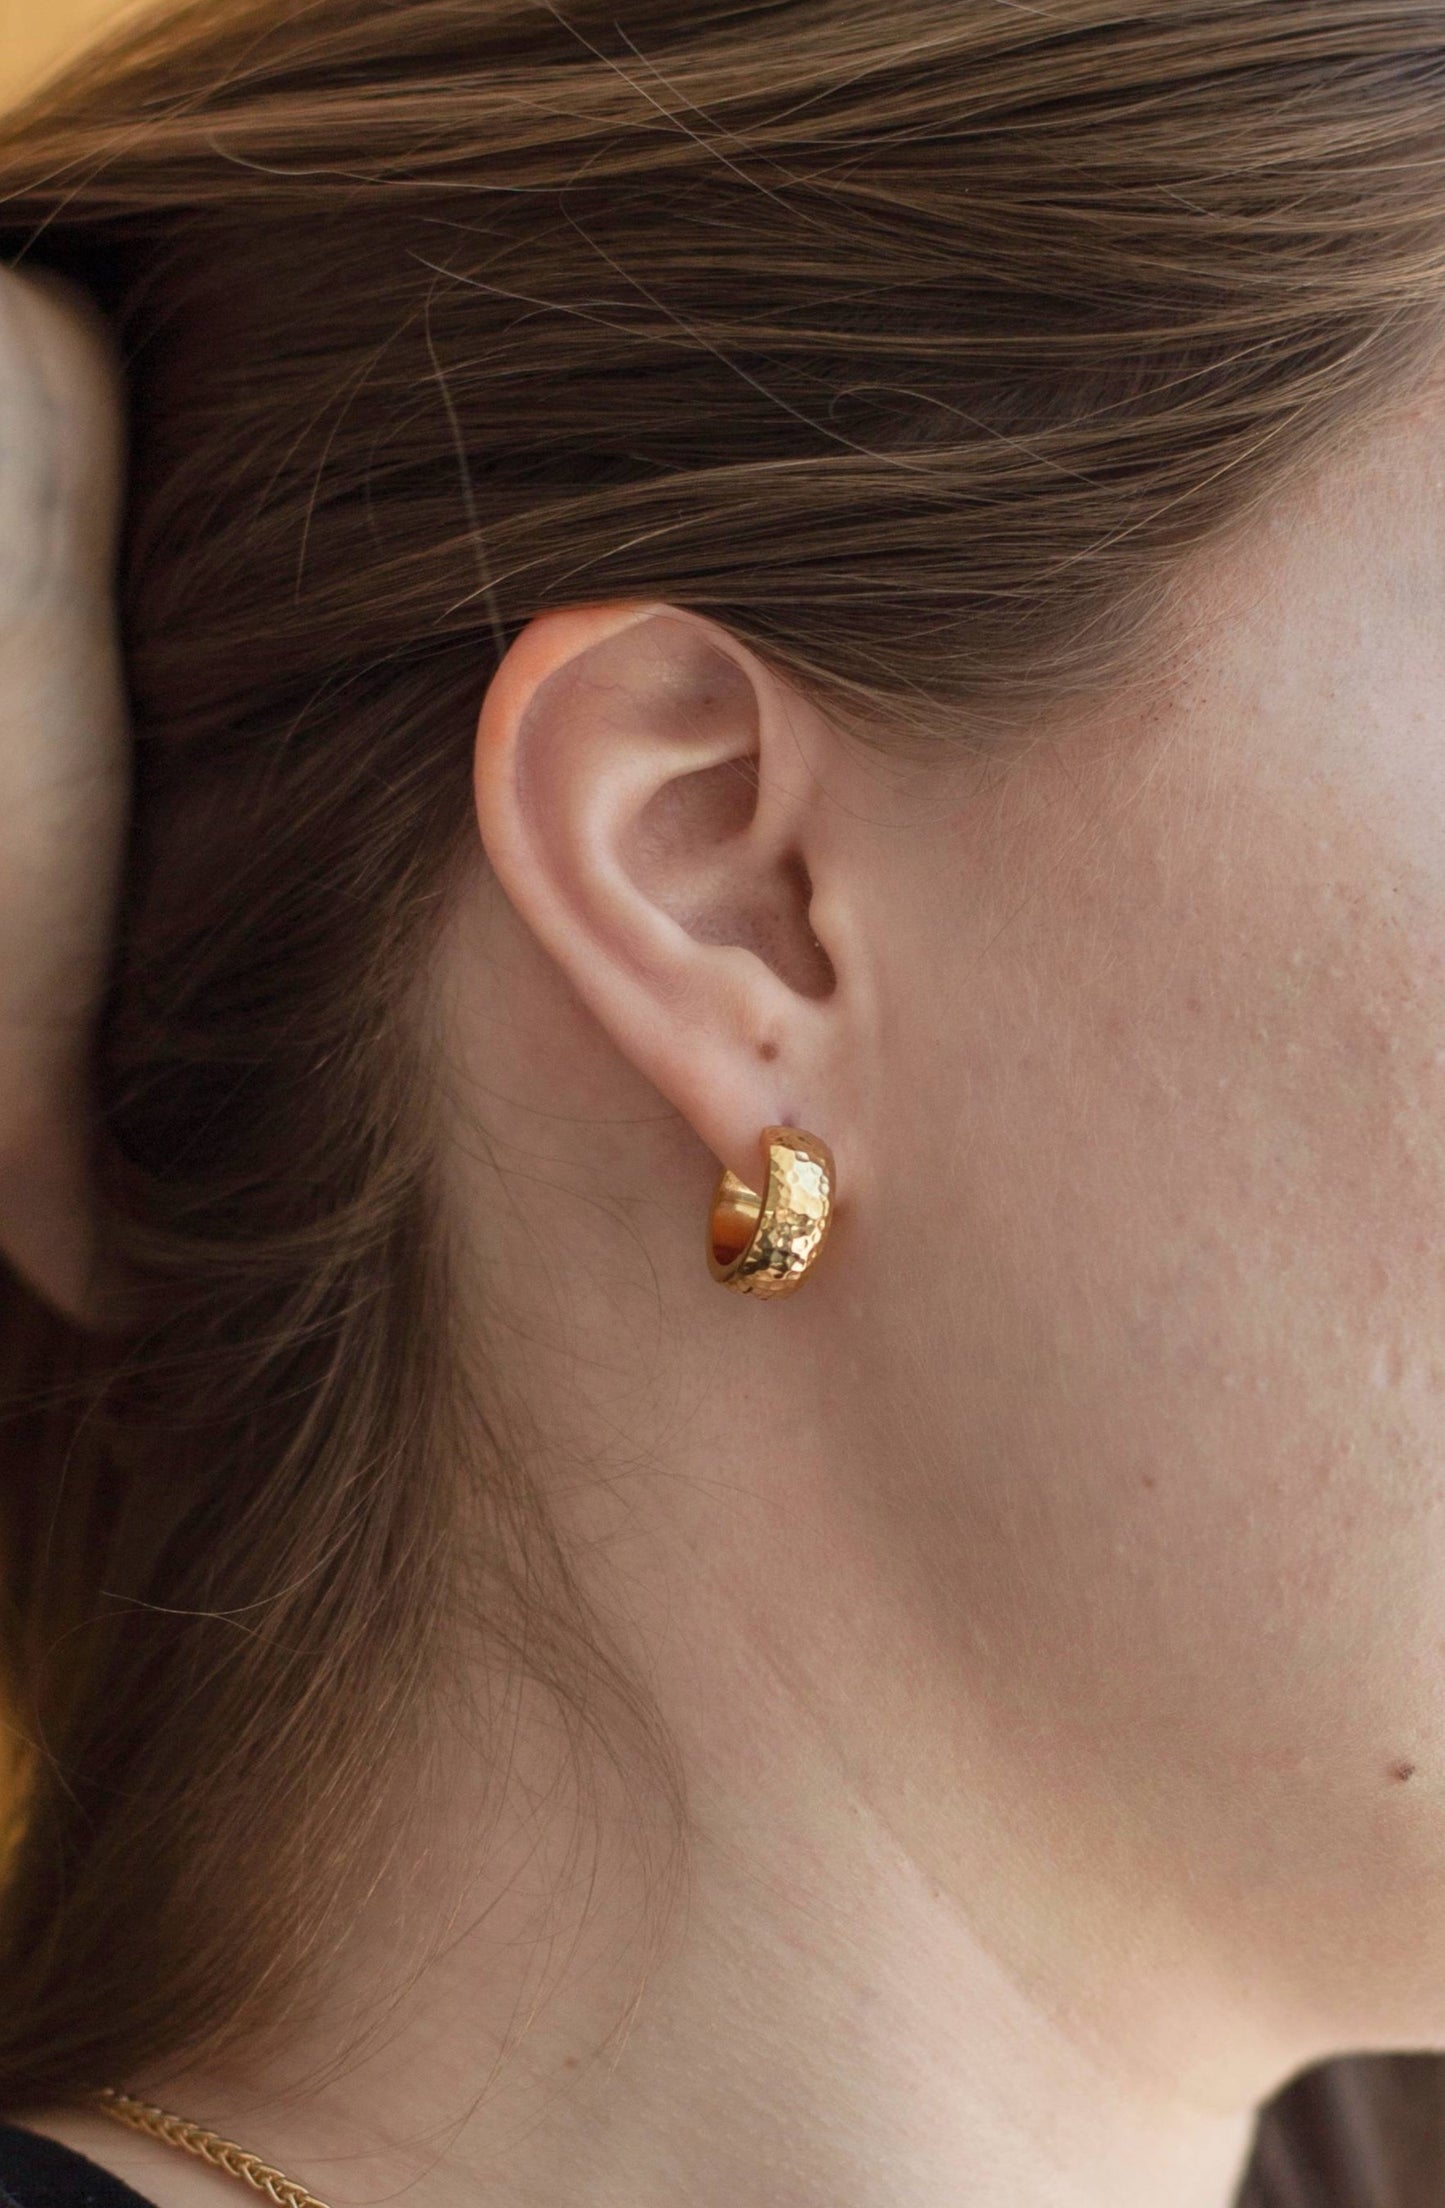 A close up photo of the earring on a model, showcasing how the size and shimmer of the earring.